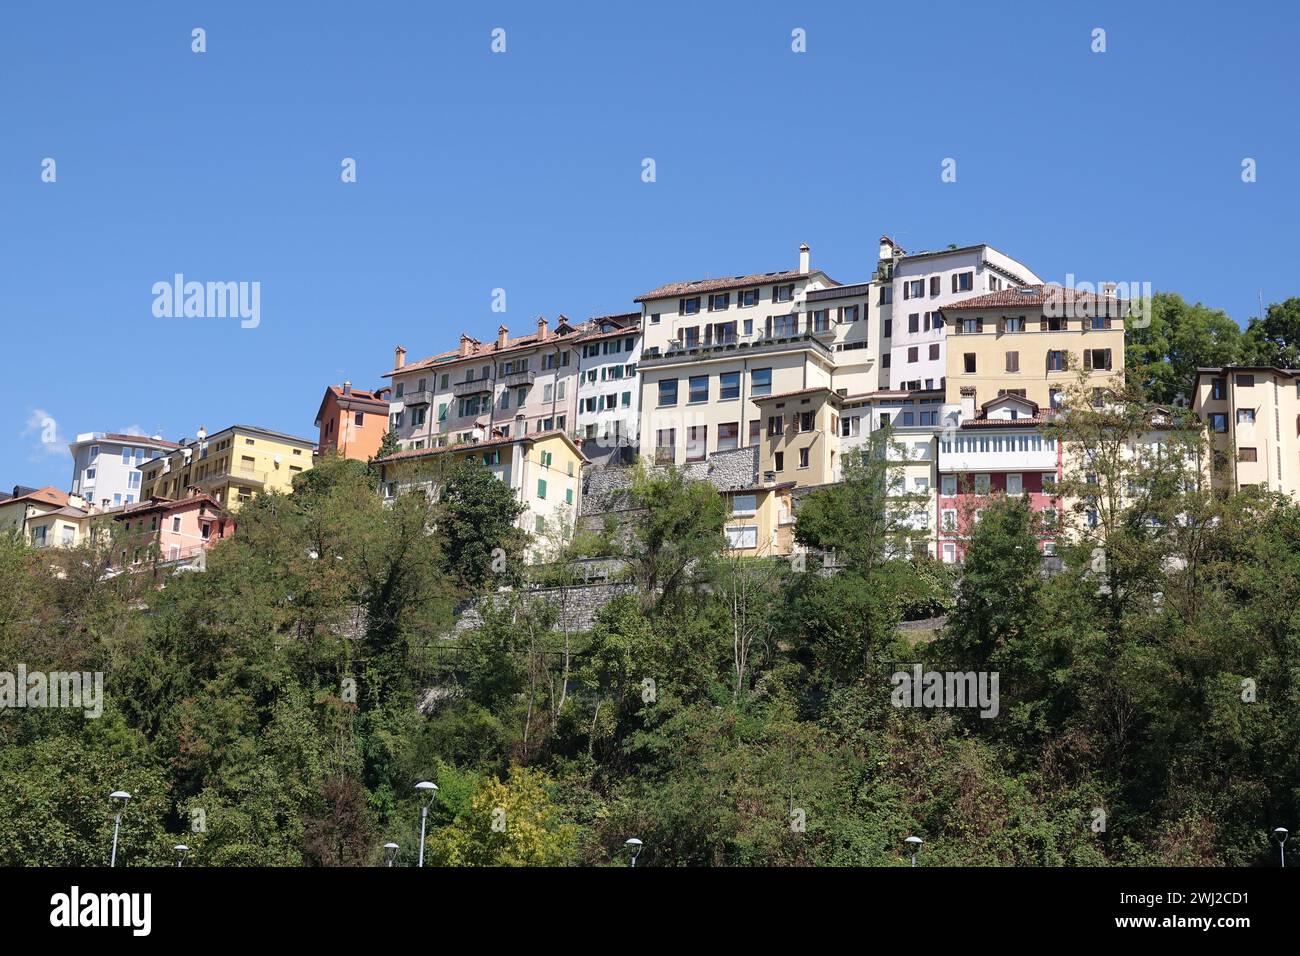 Old town of Belluno Stock Photo